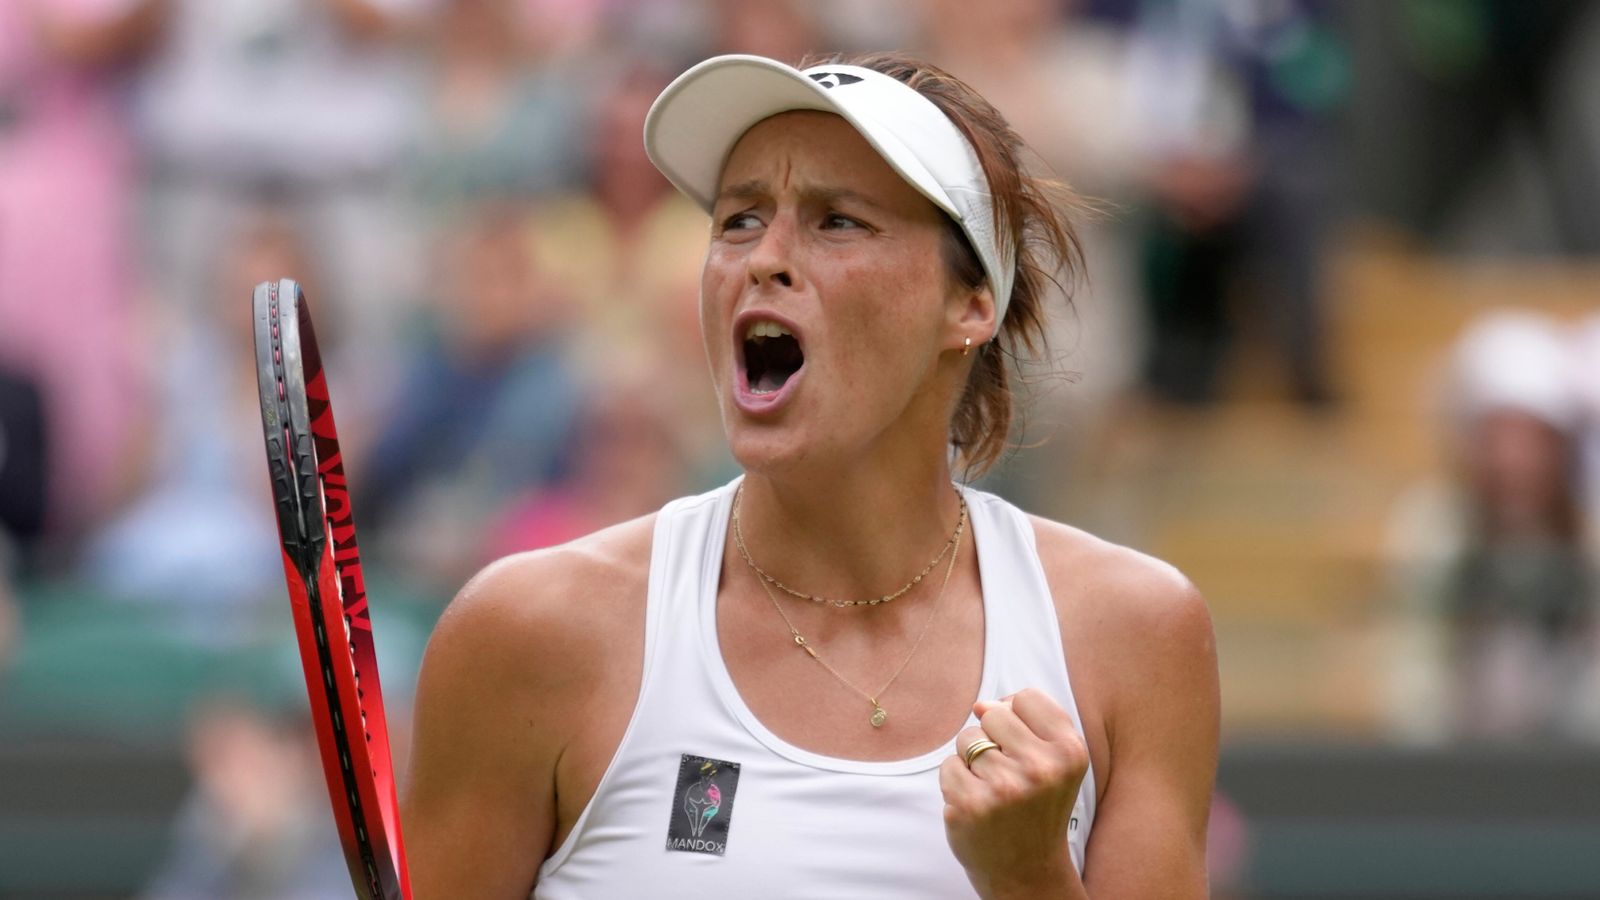 Wimbledon: Tatjana Maria reaches semi-finals for first time and faces Ons Jabeur